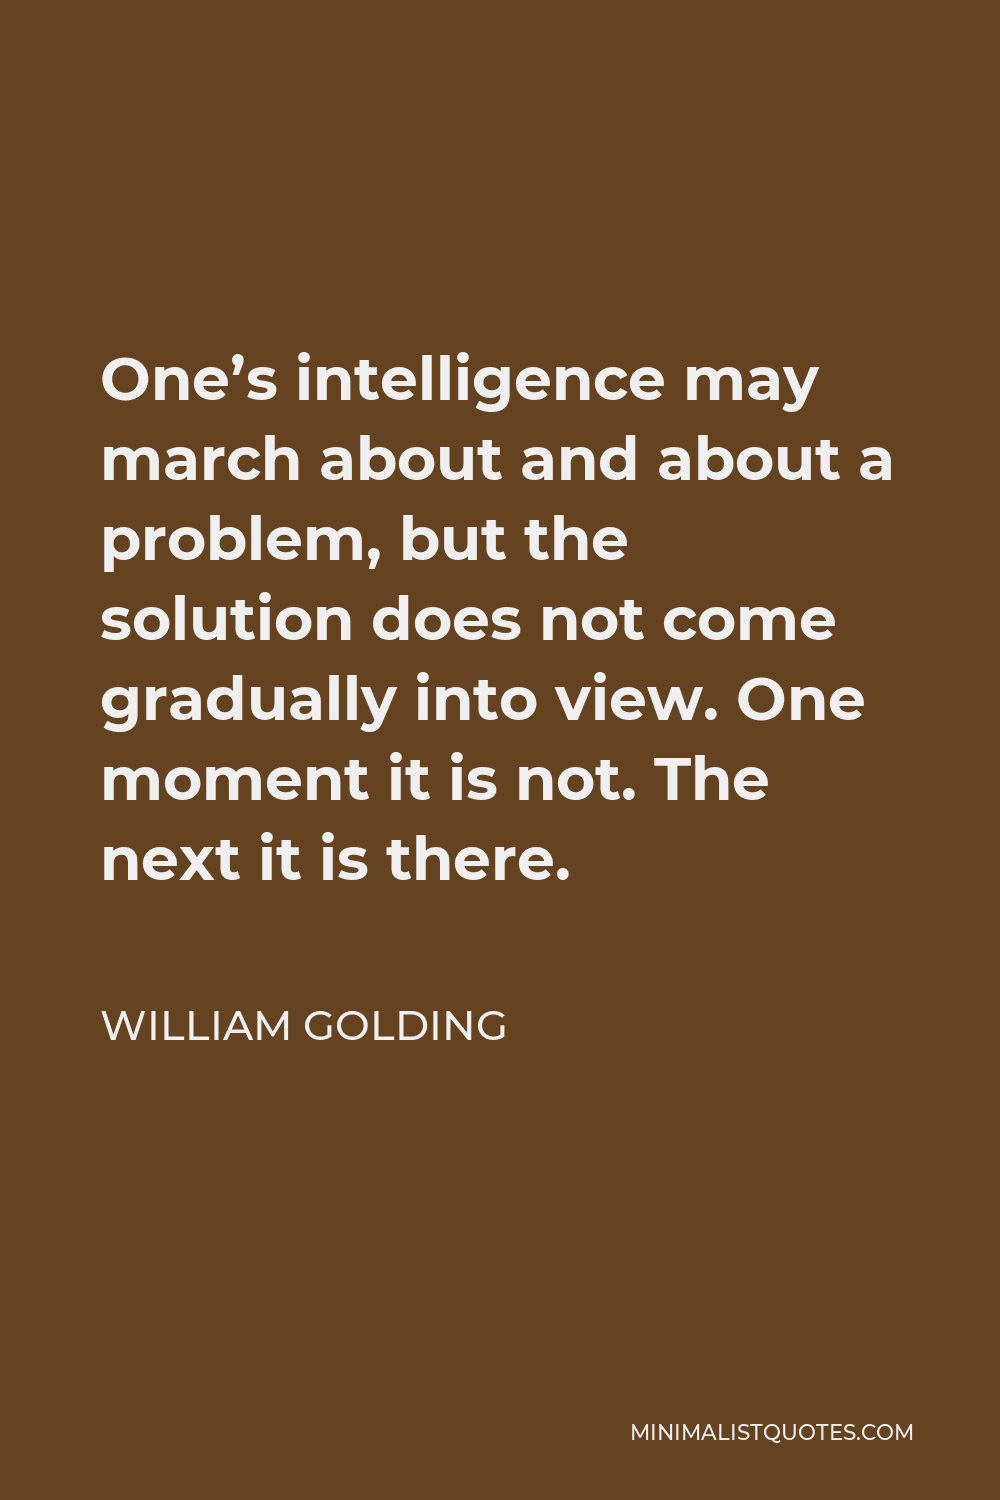 William Golding Quote - One’s intelligence may march about and about a problem, but the solution does not come gradually into view. One moment it is not. The next it is there.